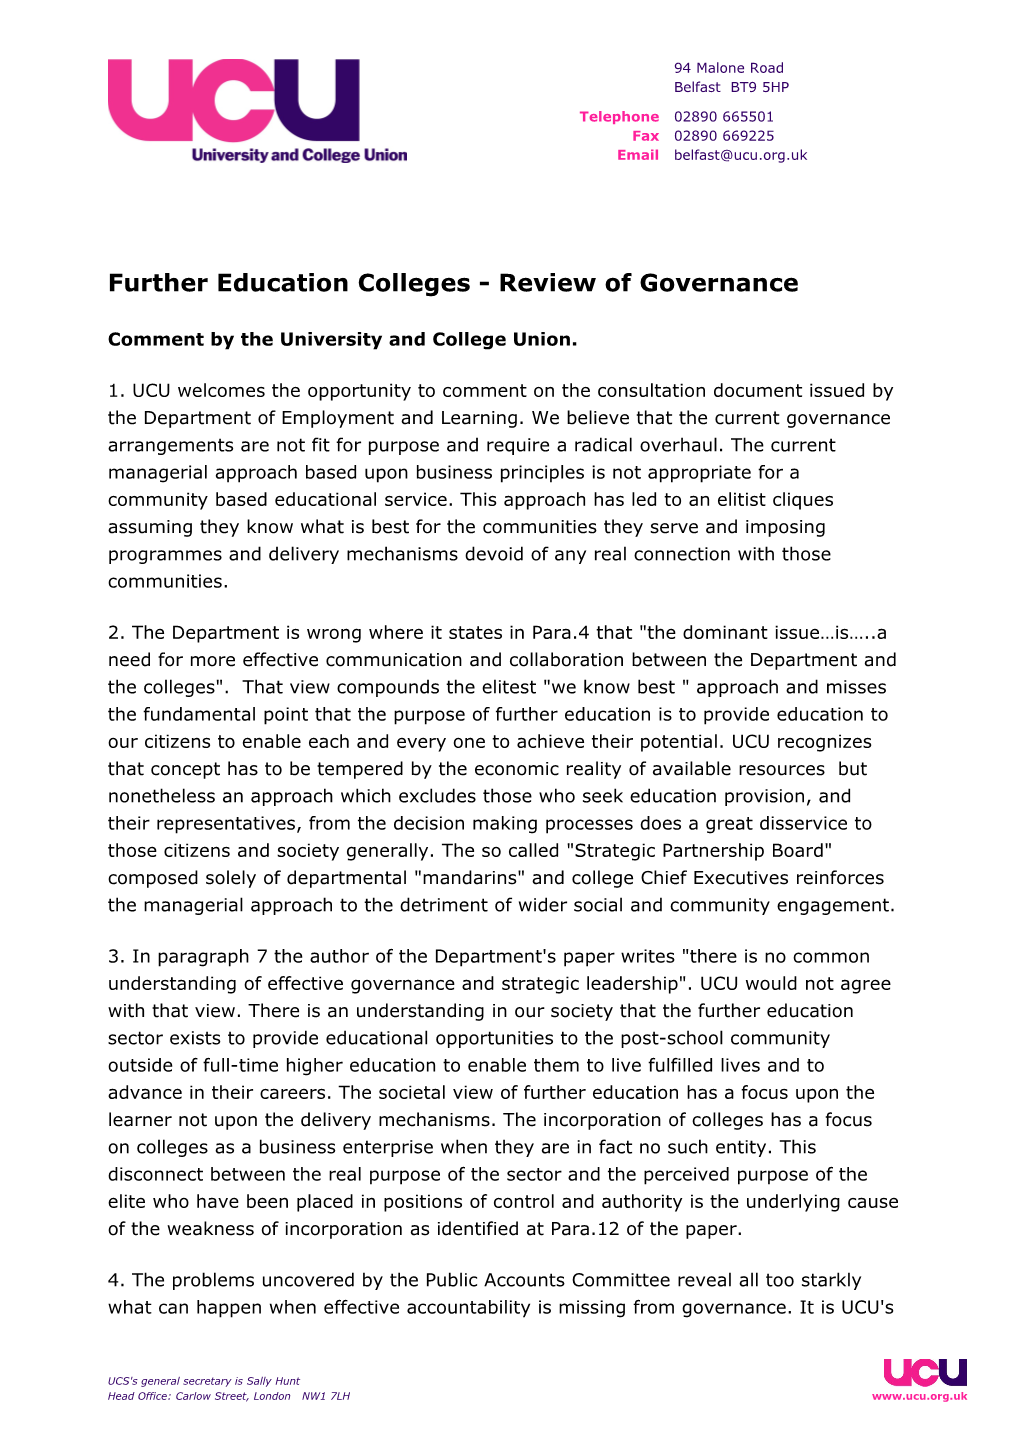 Further Education Colleges - Review of Governance